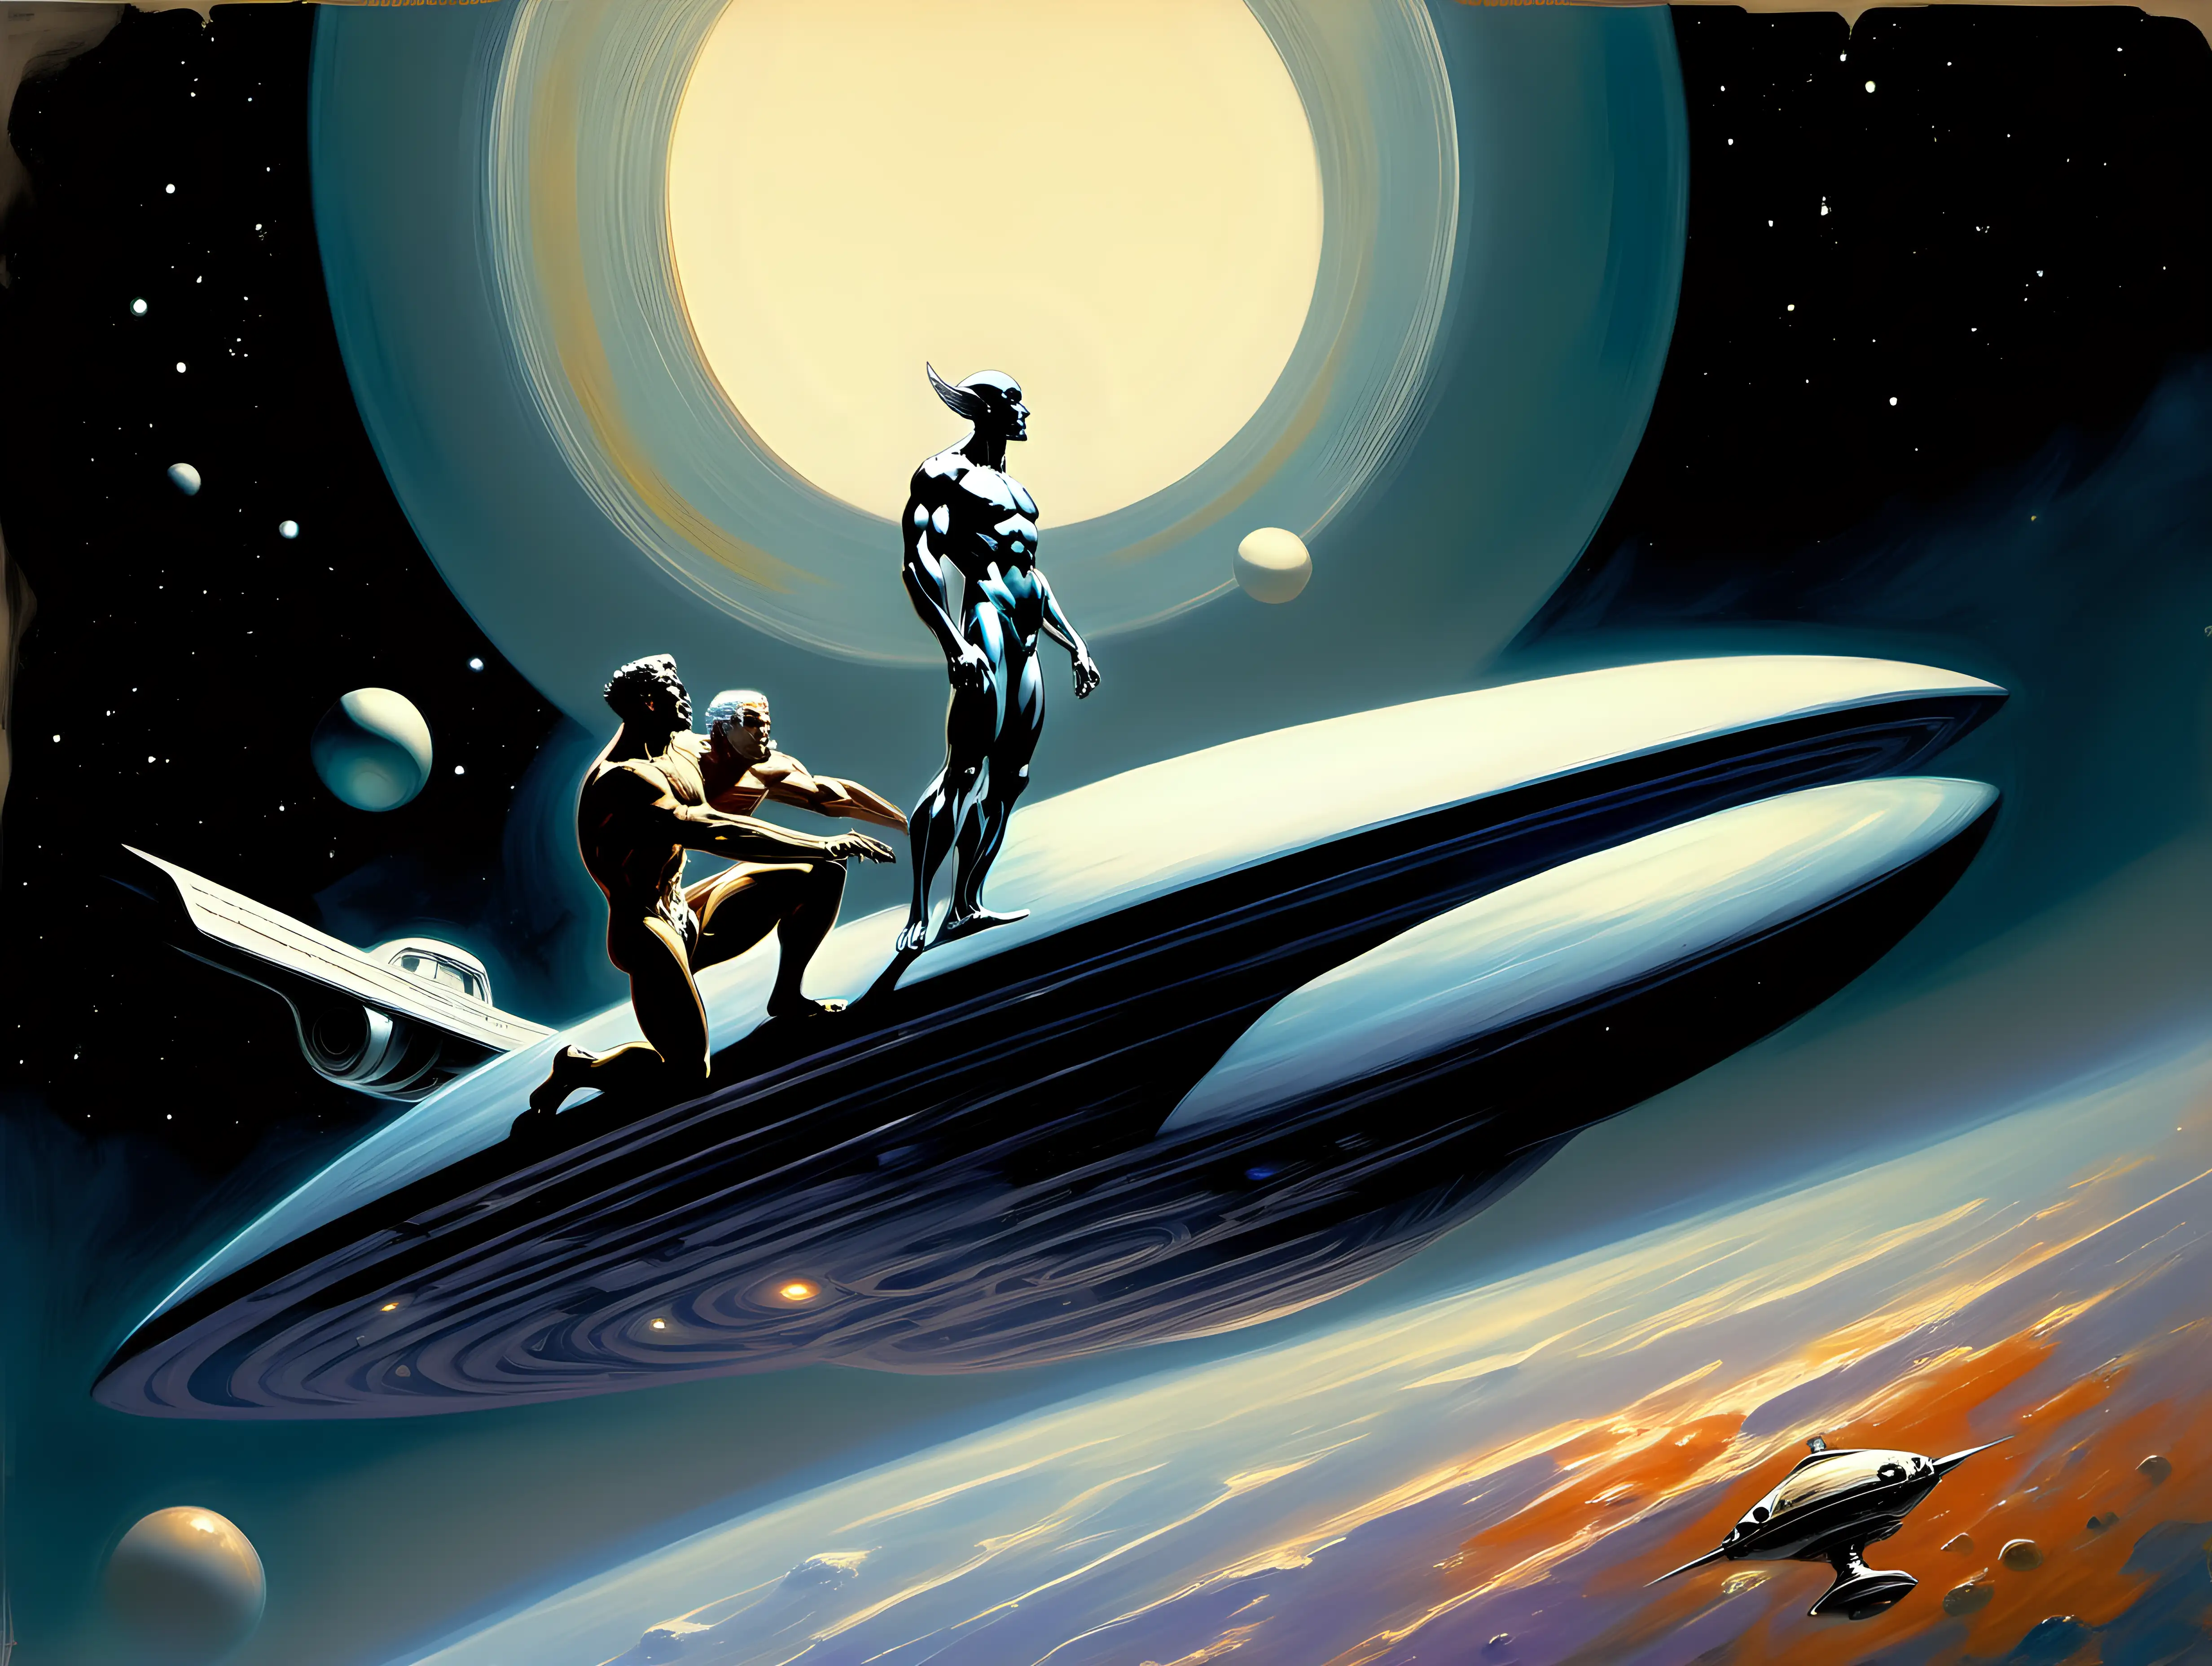 Icarus and  Silver Surfer on a space ship hovering over Saturn Frank Frazetta style